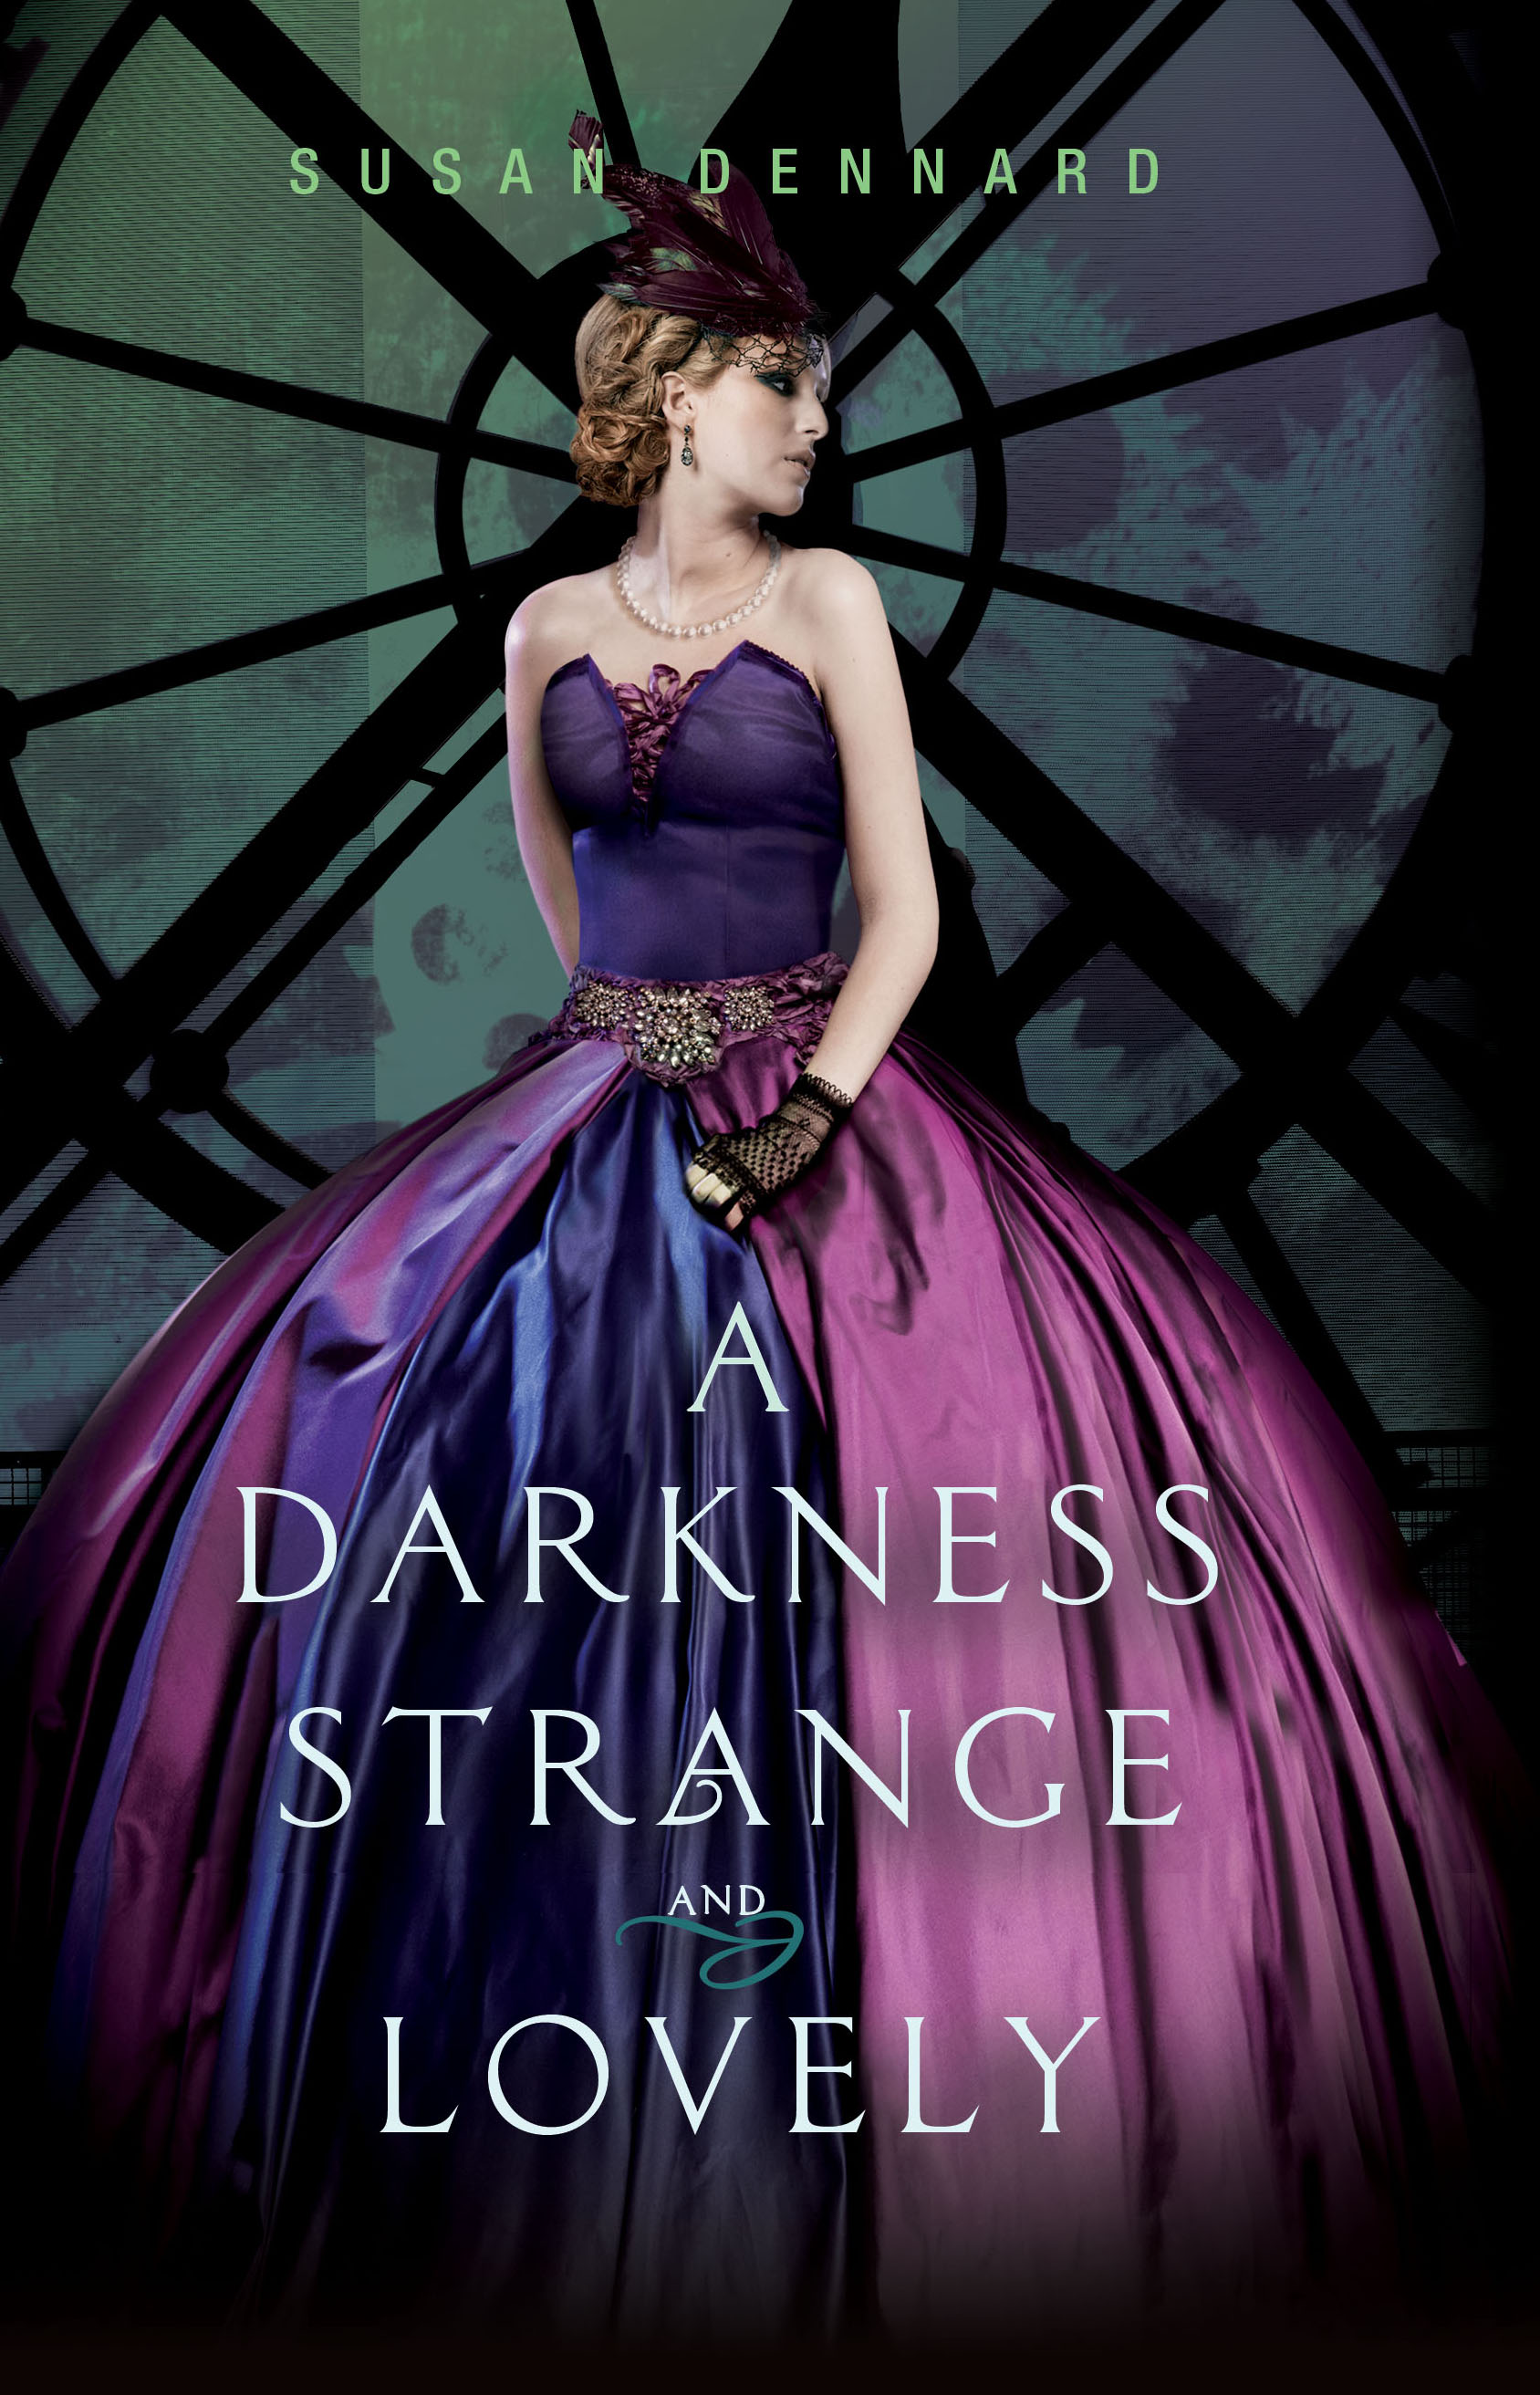 https://www.goodreads.com/book/show/13624584-a-darkness-strange-and-lovely?ac=1